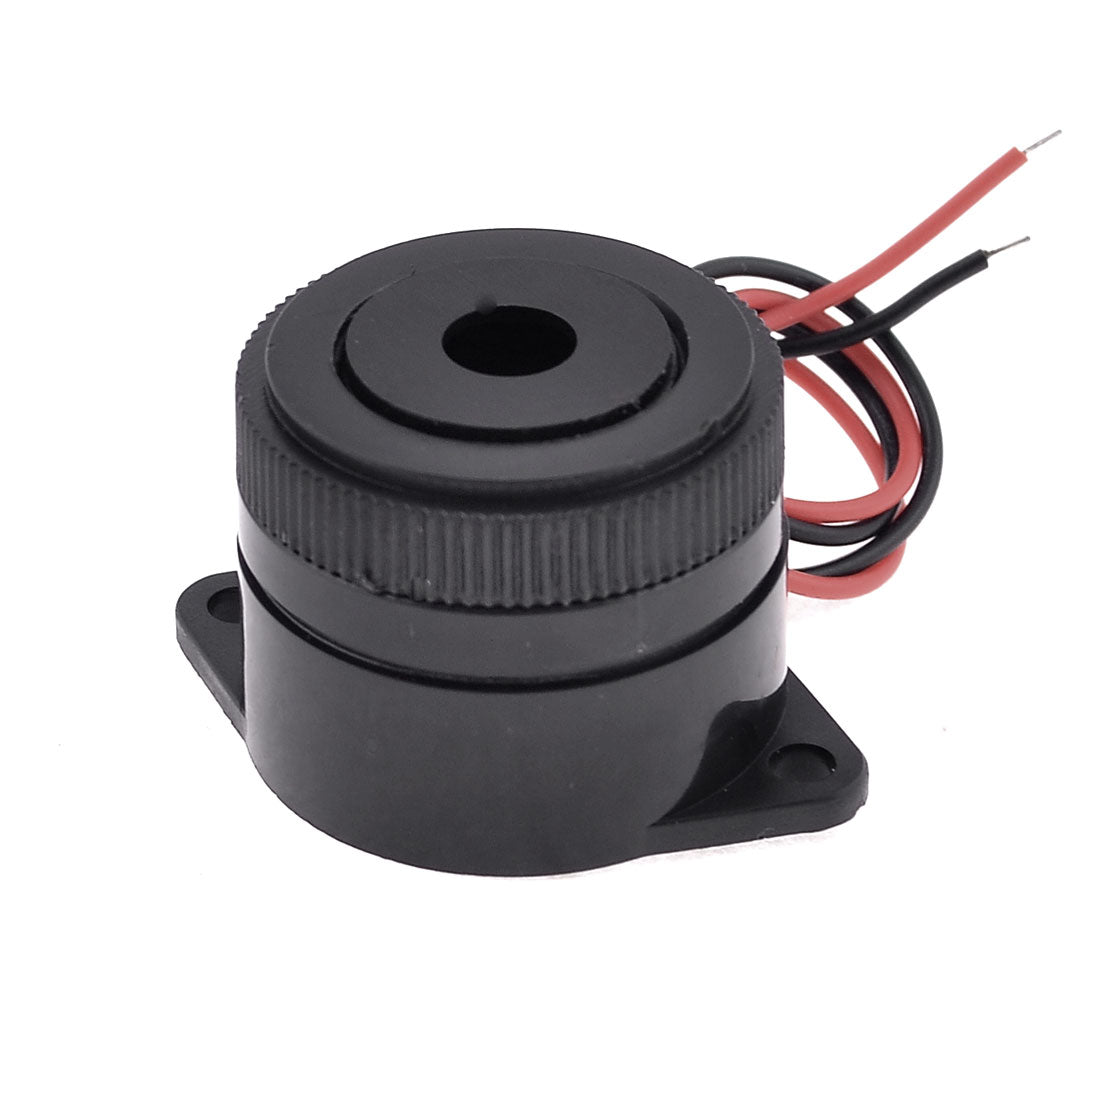 uxcell Uxcell Black Housing DC 3-24V 2 Wire Industrial Electronic Continuous Sound Buzzer 105dB